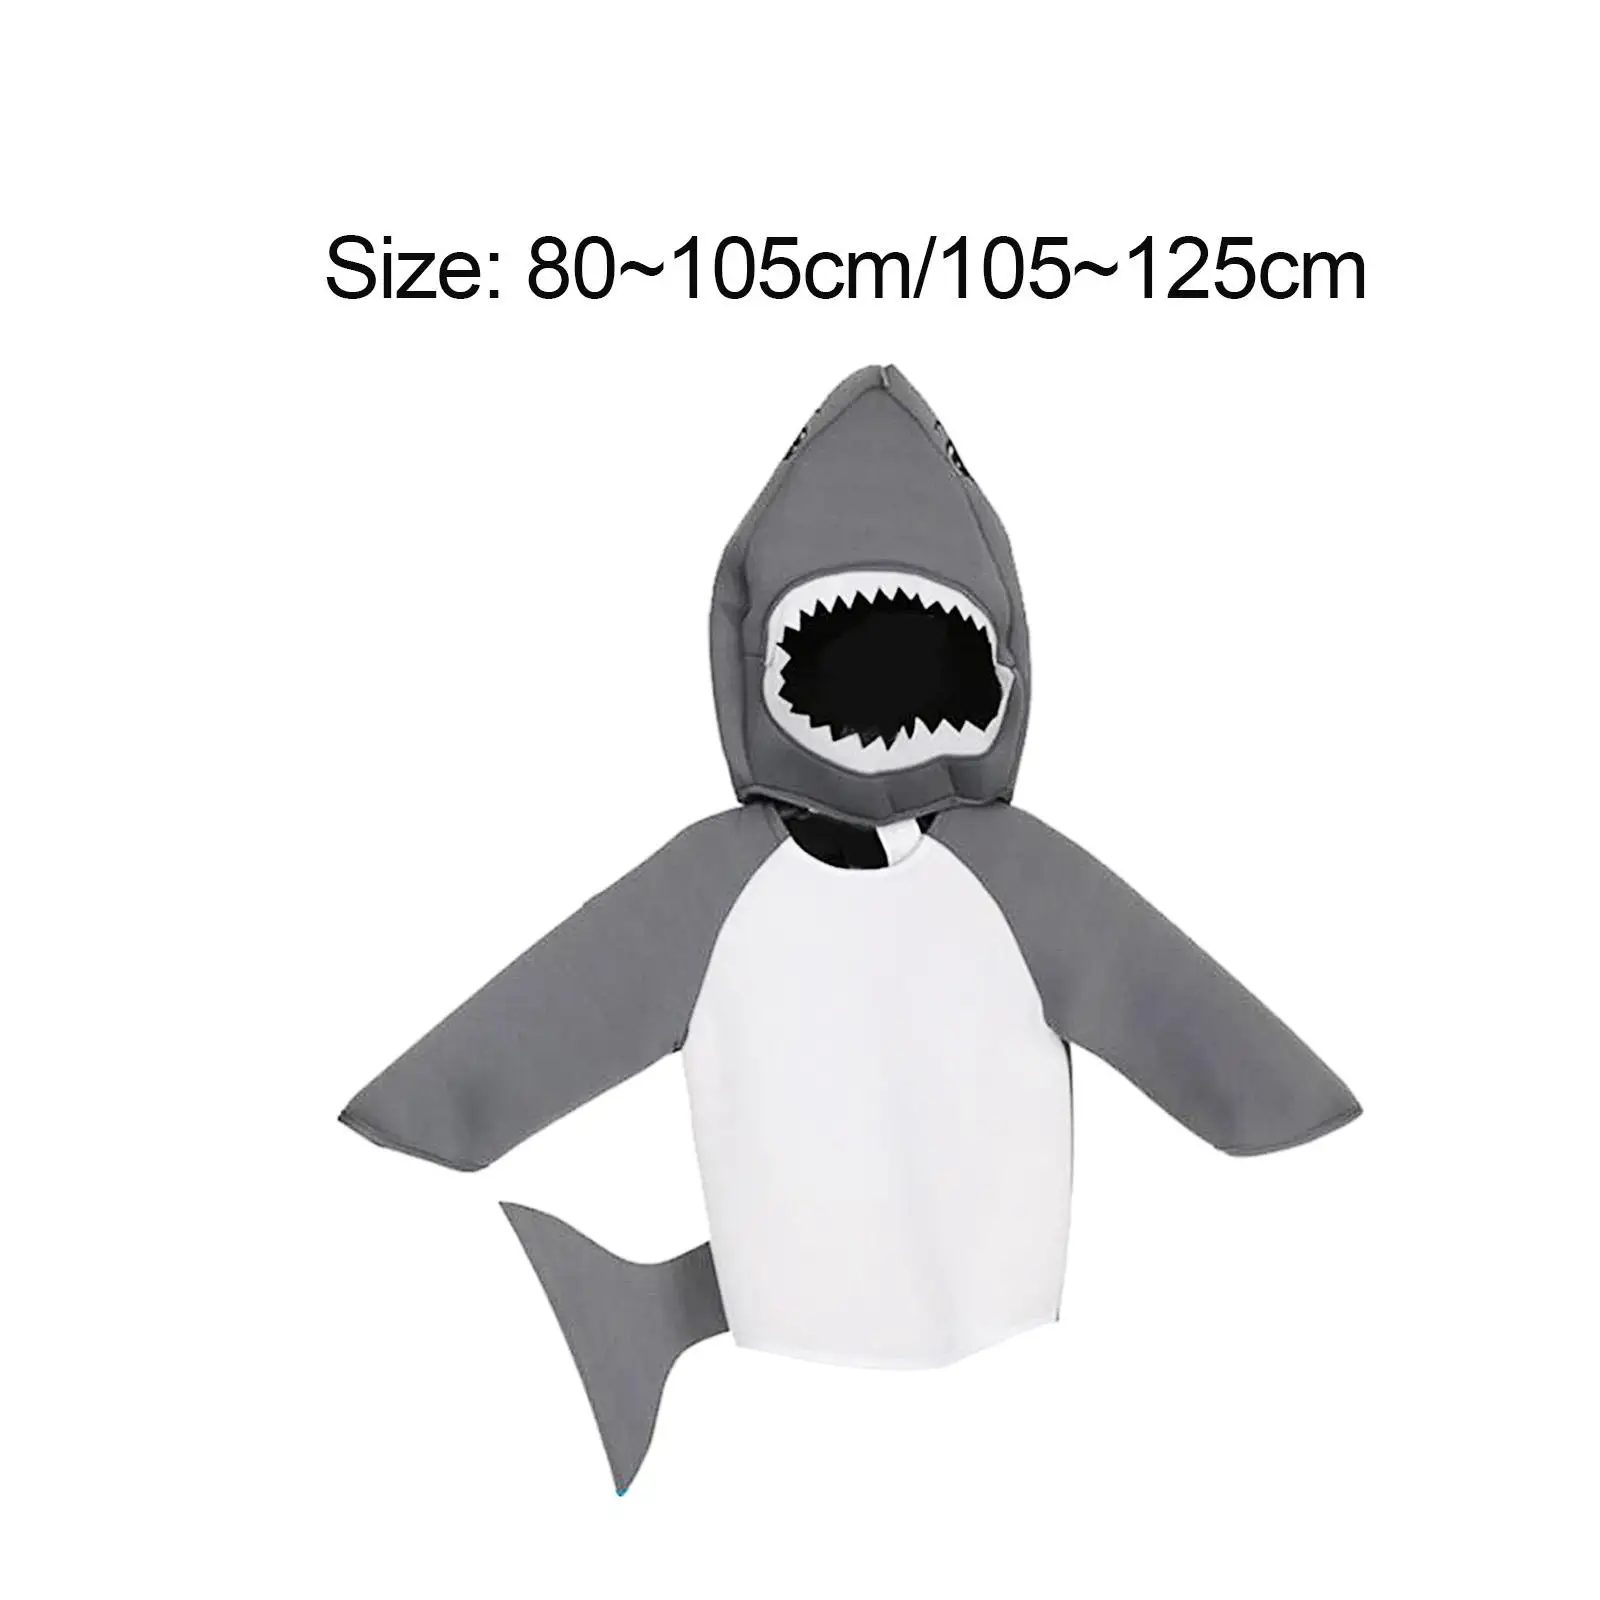 Kids Shark Costume Hoodie Soft for Boys Girls Halloween Dress up for Stage Performance Carnivals Children`s Day Party Toddlers